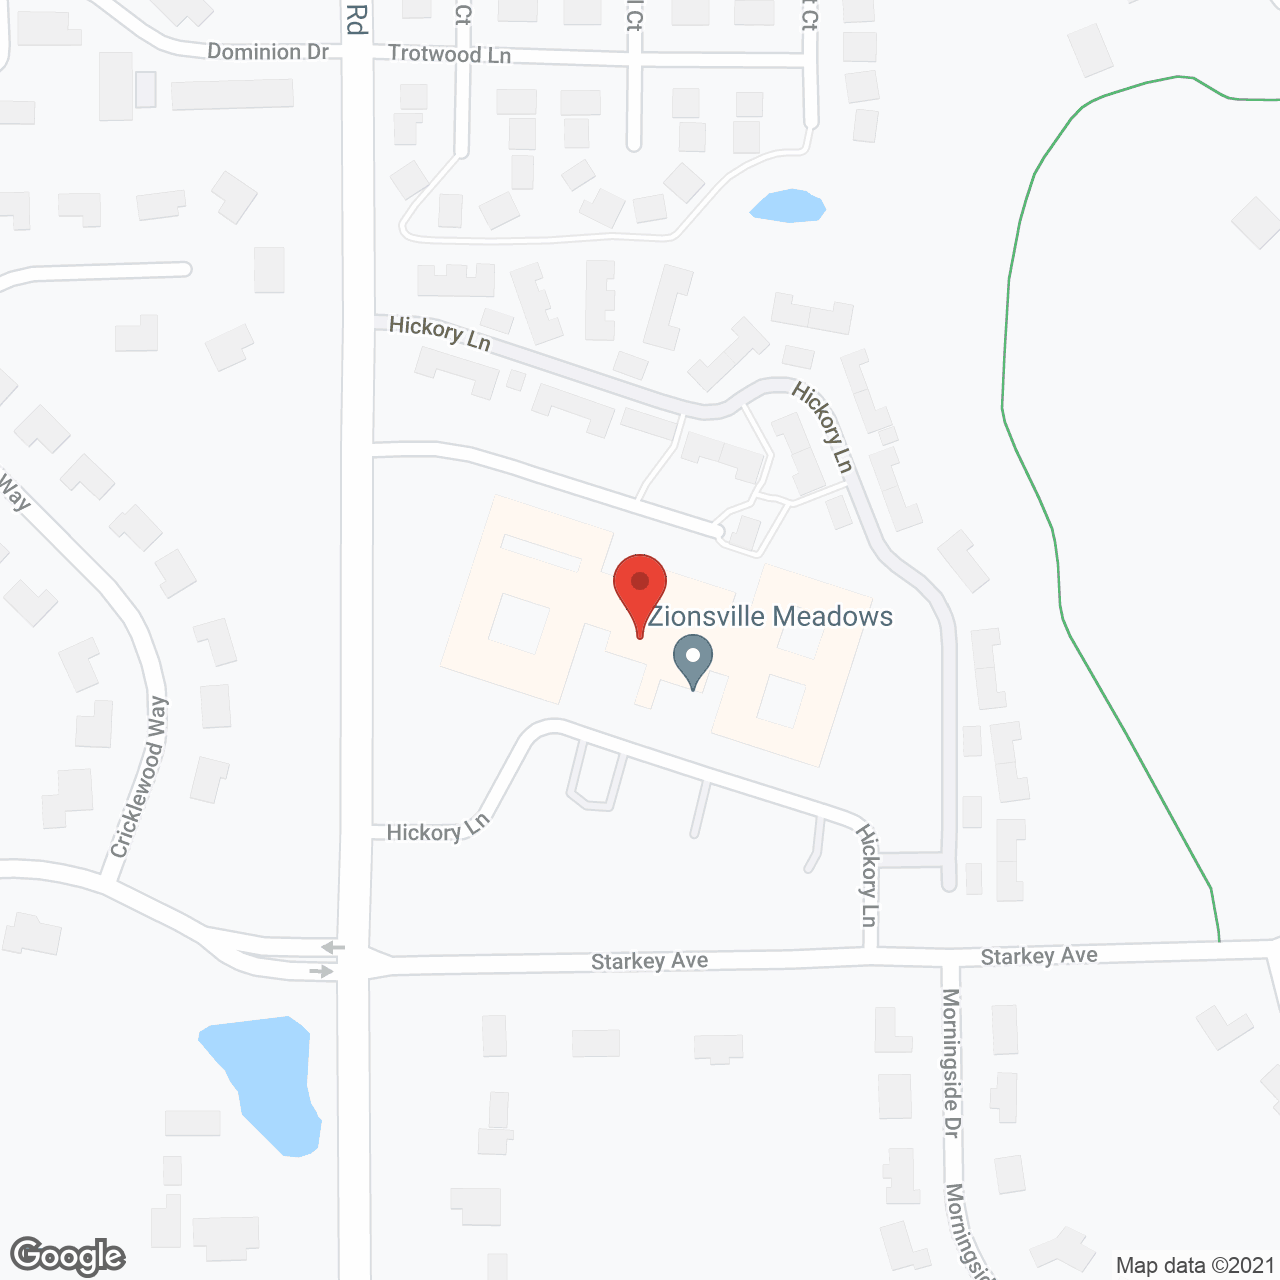 Zionsville Meadows Assisted Living in google map